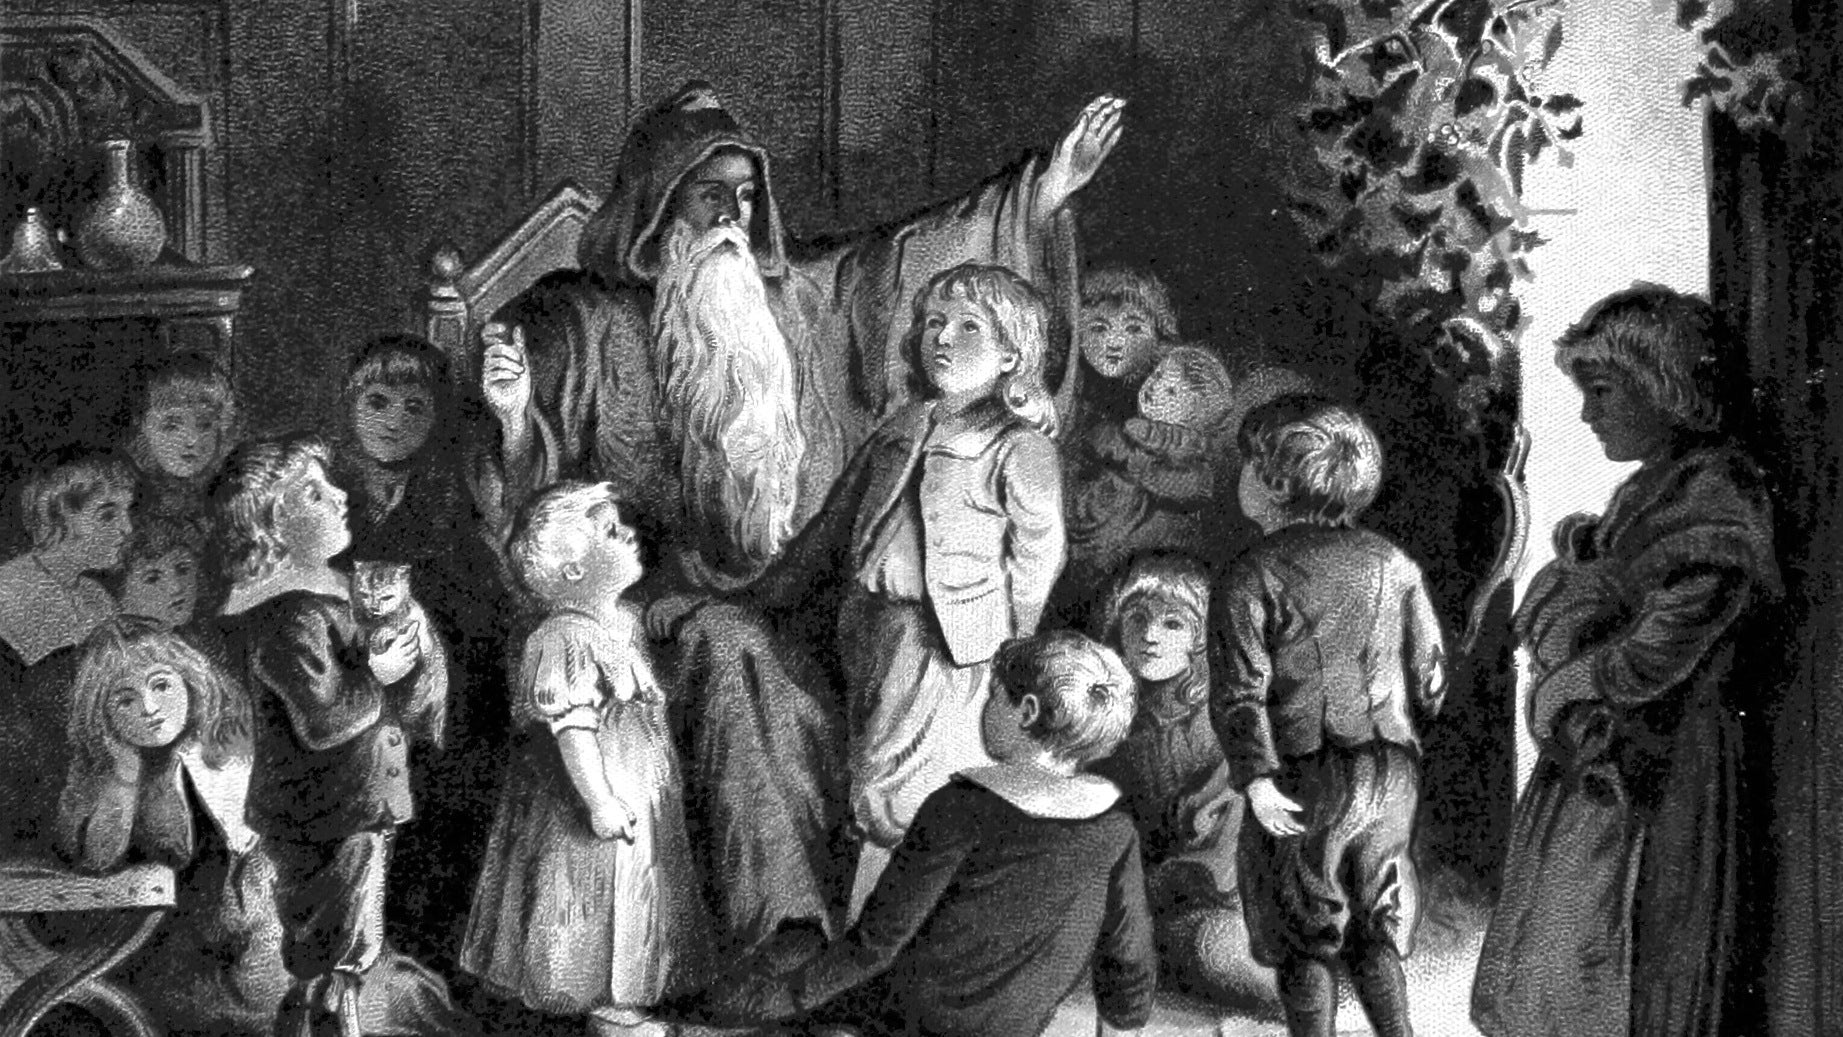 Father Christmas sits telling tales to a horde of children in an illustration from 'The Coming of Father Christmas'.